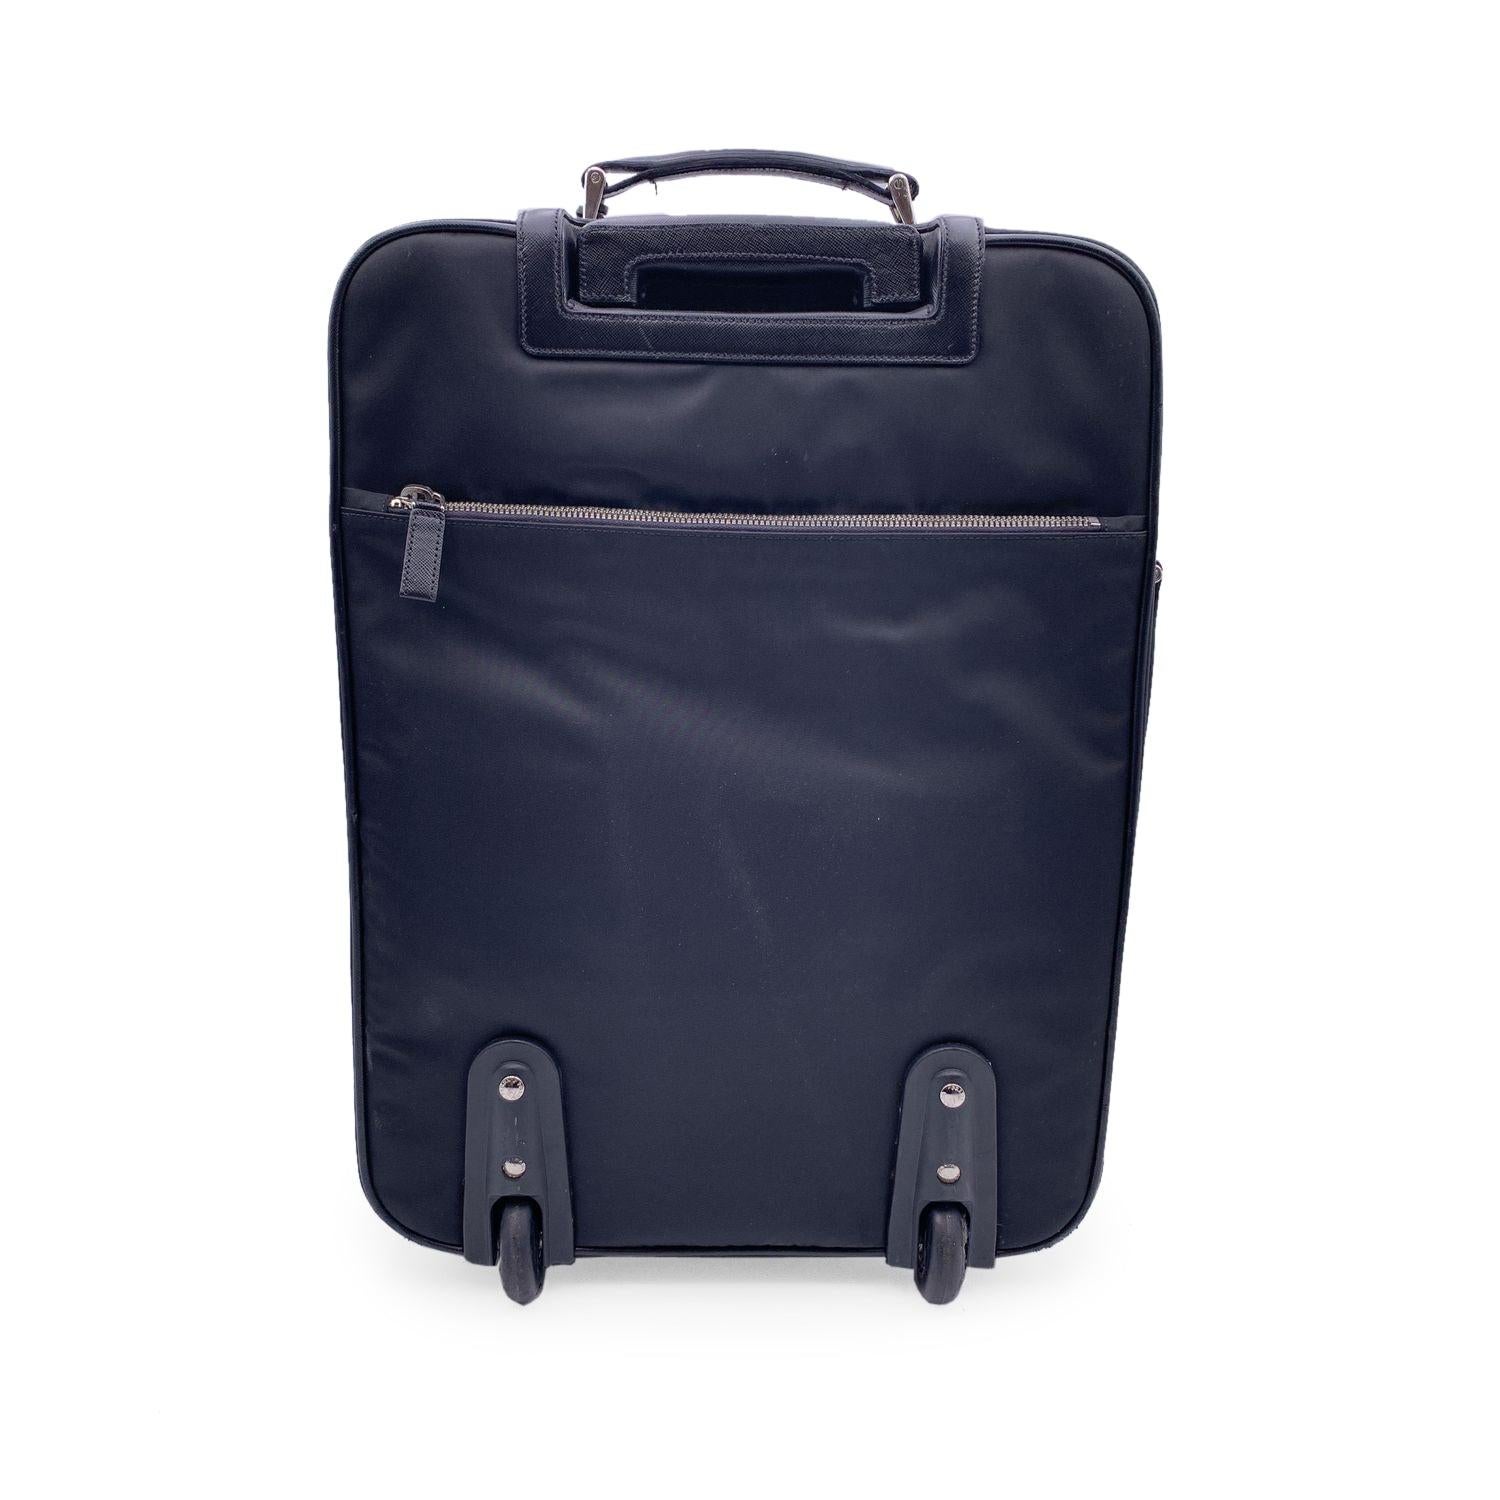 Prada Black Nylon Rolling Suitcase Trolley Luggage Travel Bag In Excellent Condition For Sale In Rome, Rome